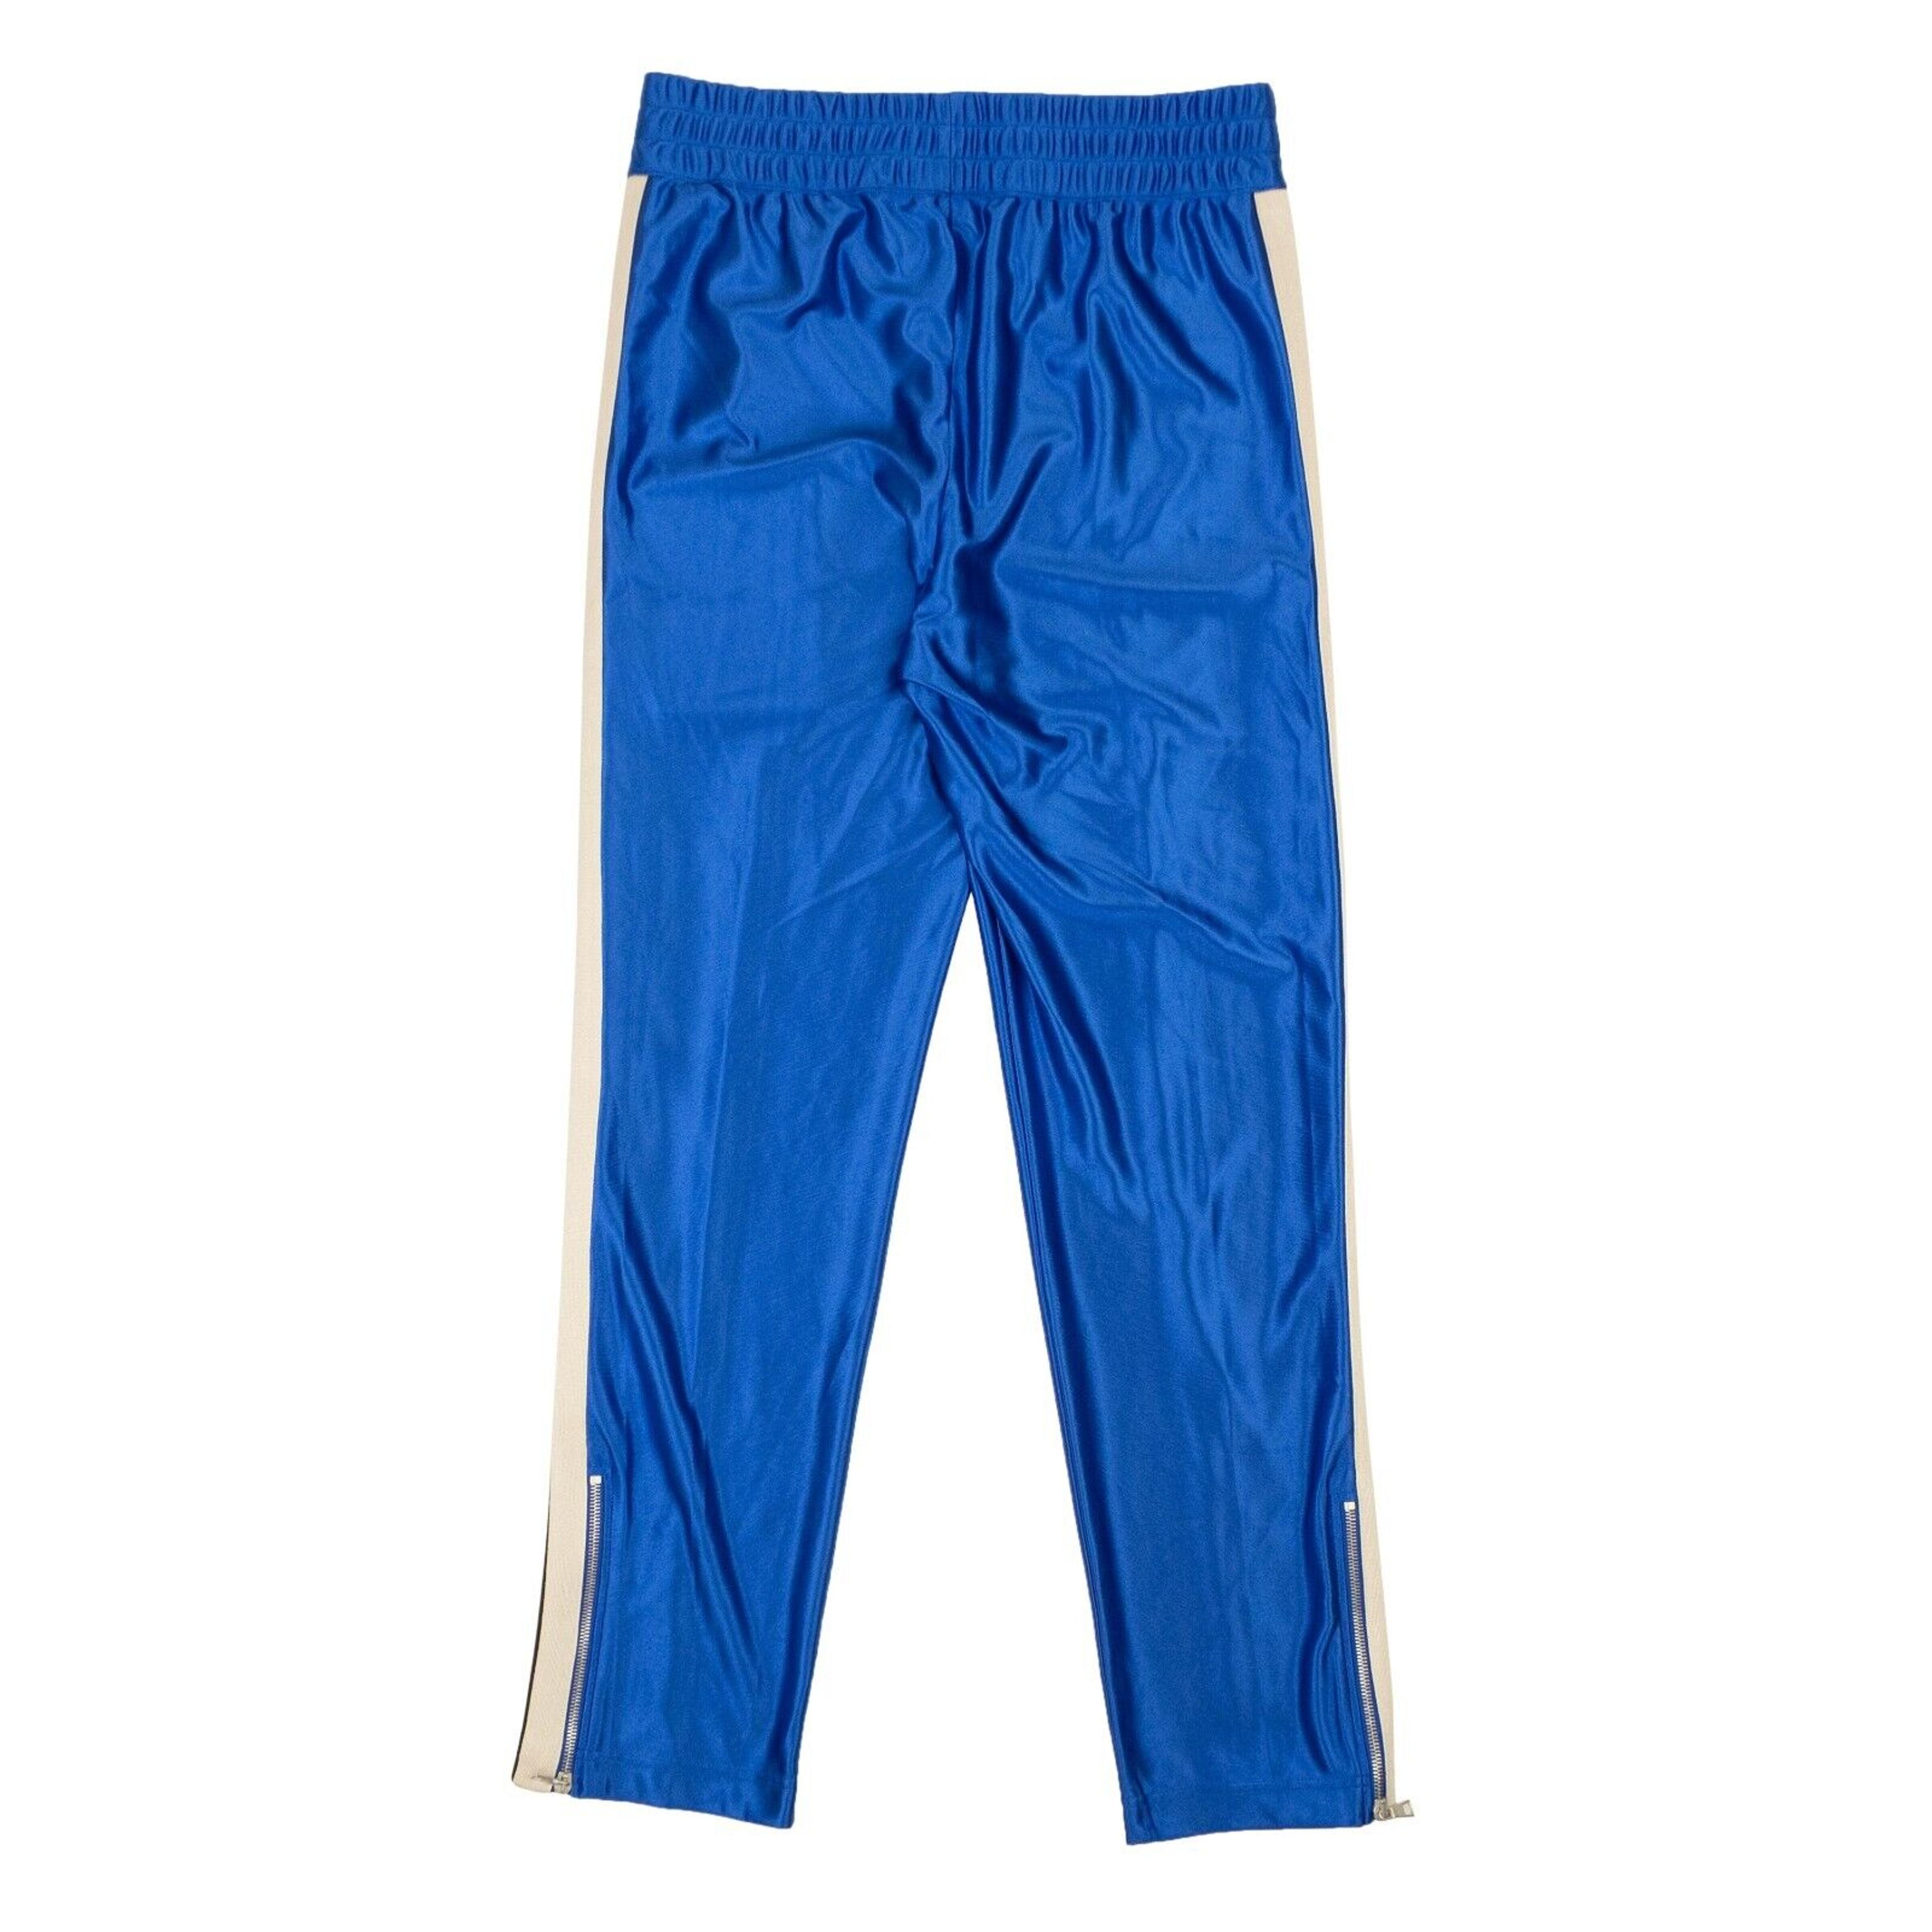 Alternate View 2 of Blue Polyester Track Pants